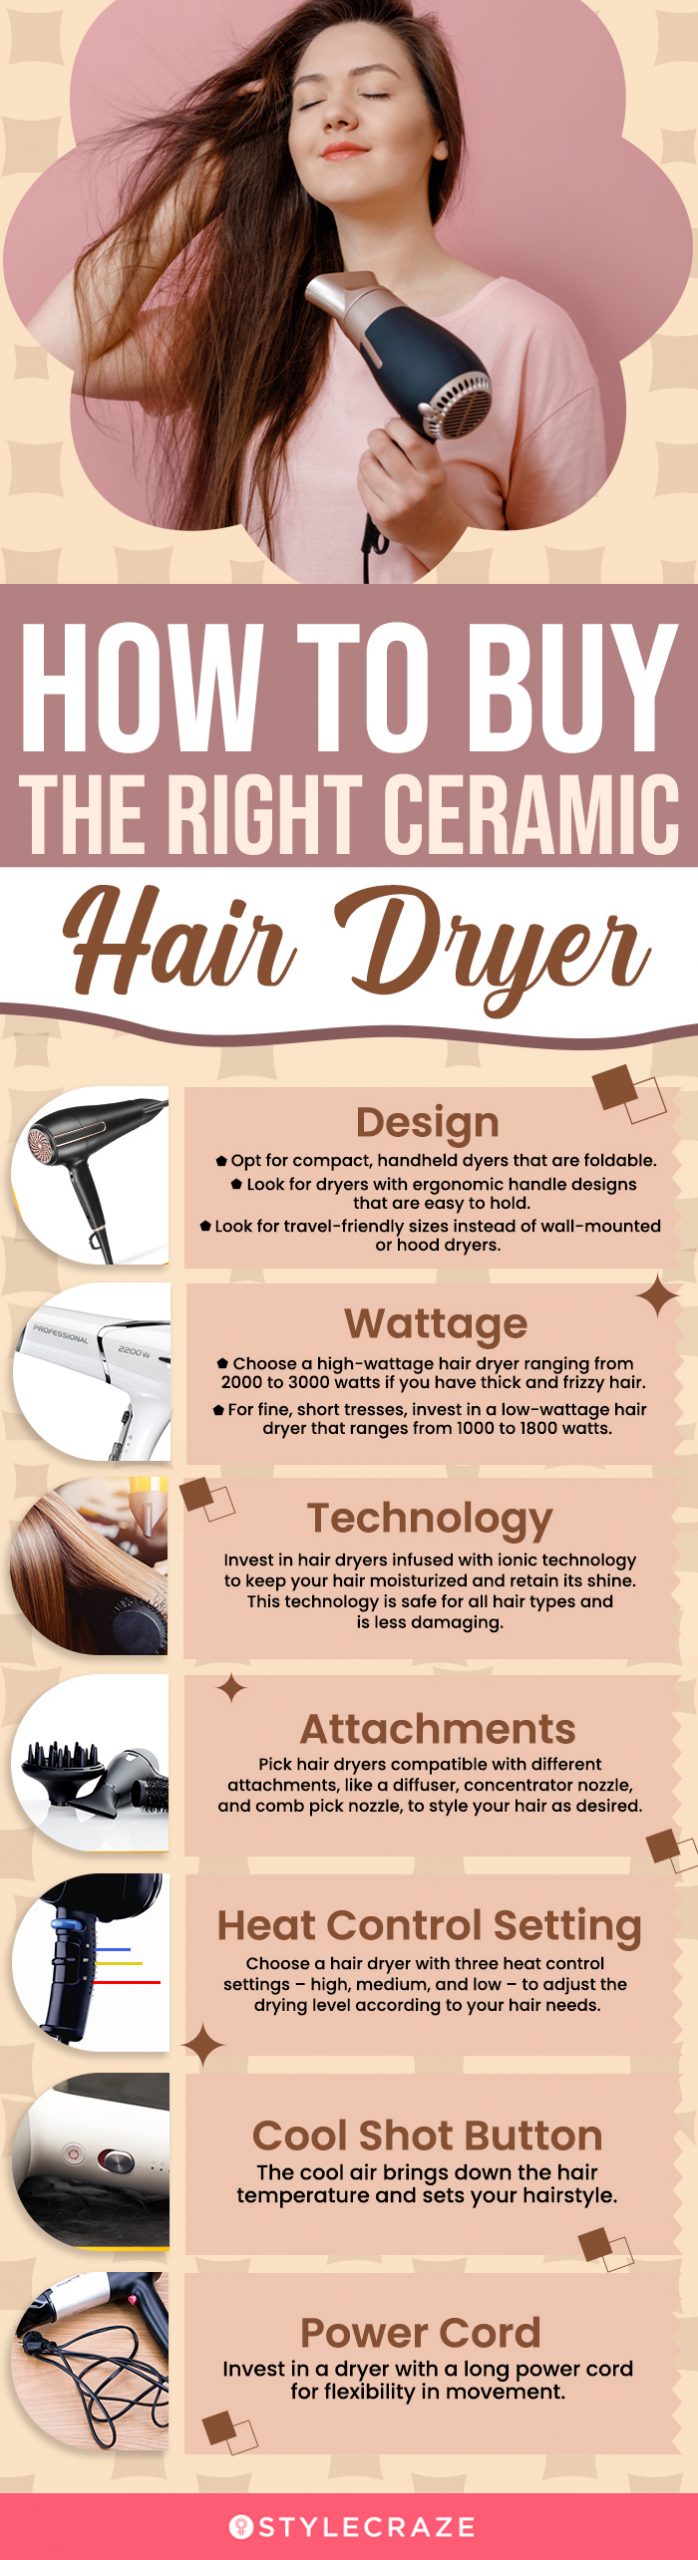 How To Buy The Right Ceramic Hair Dryer (infographic)